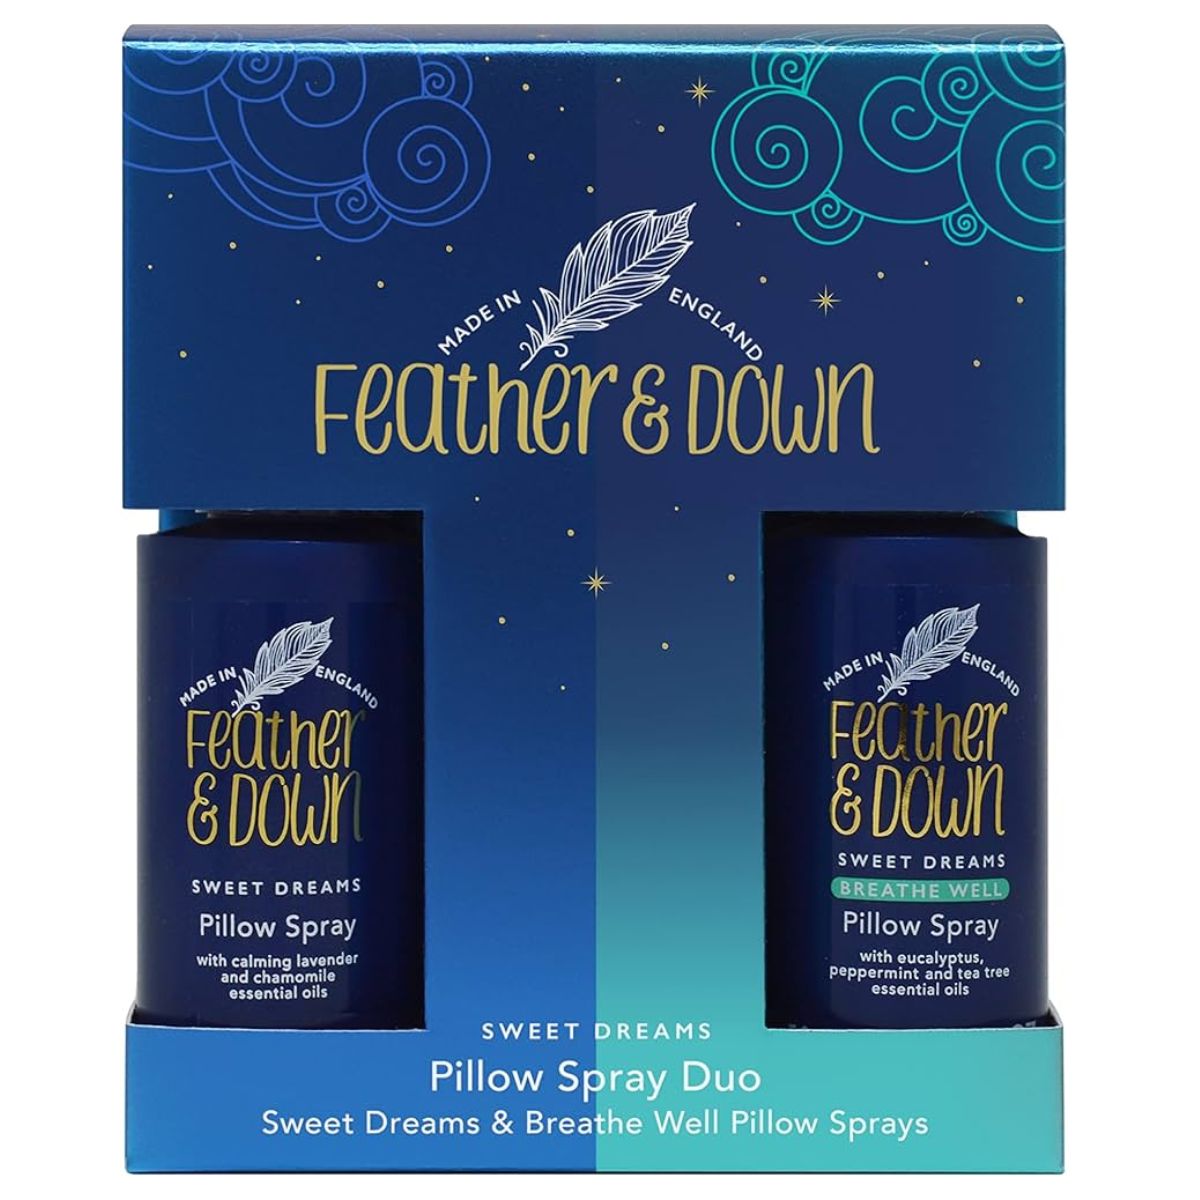 Feather and Down - Pillow Spray Duo Set - 50ml Sweet Dreams Pillow Spray and 50ml Breathe Well Pillow Spray.